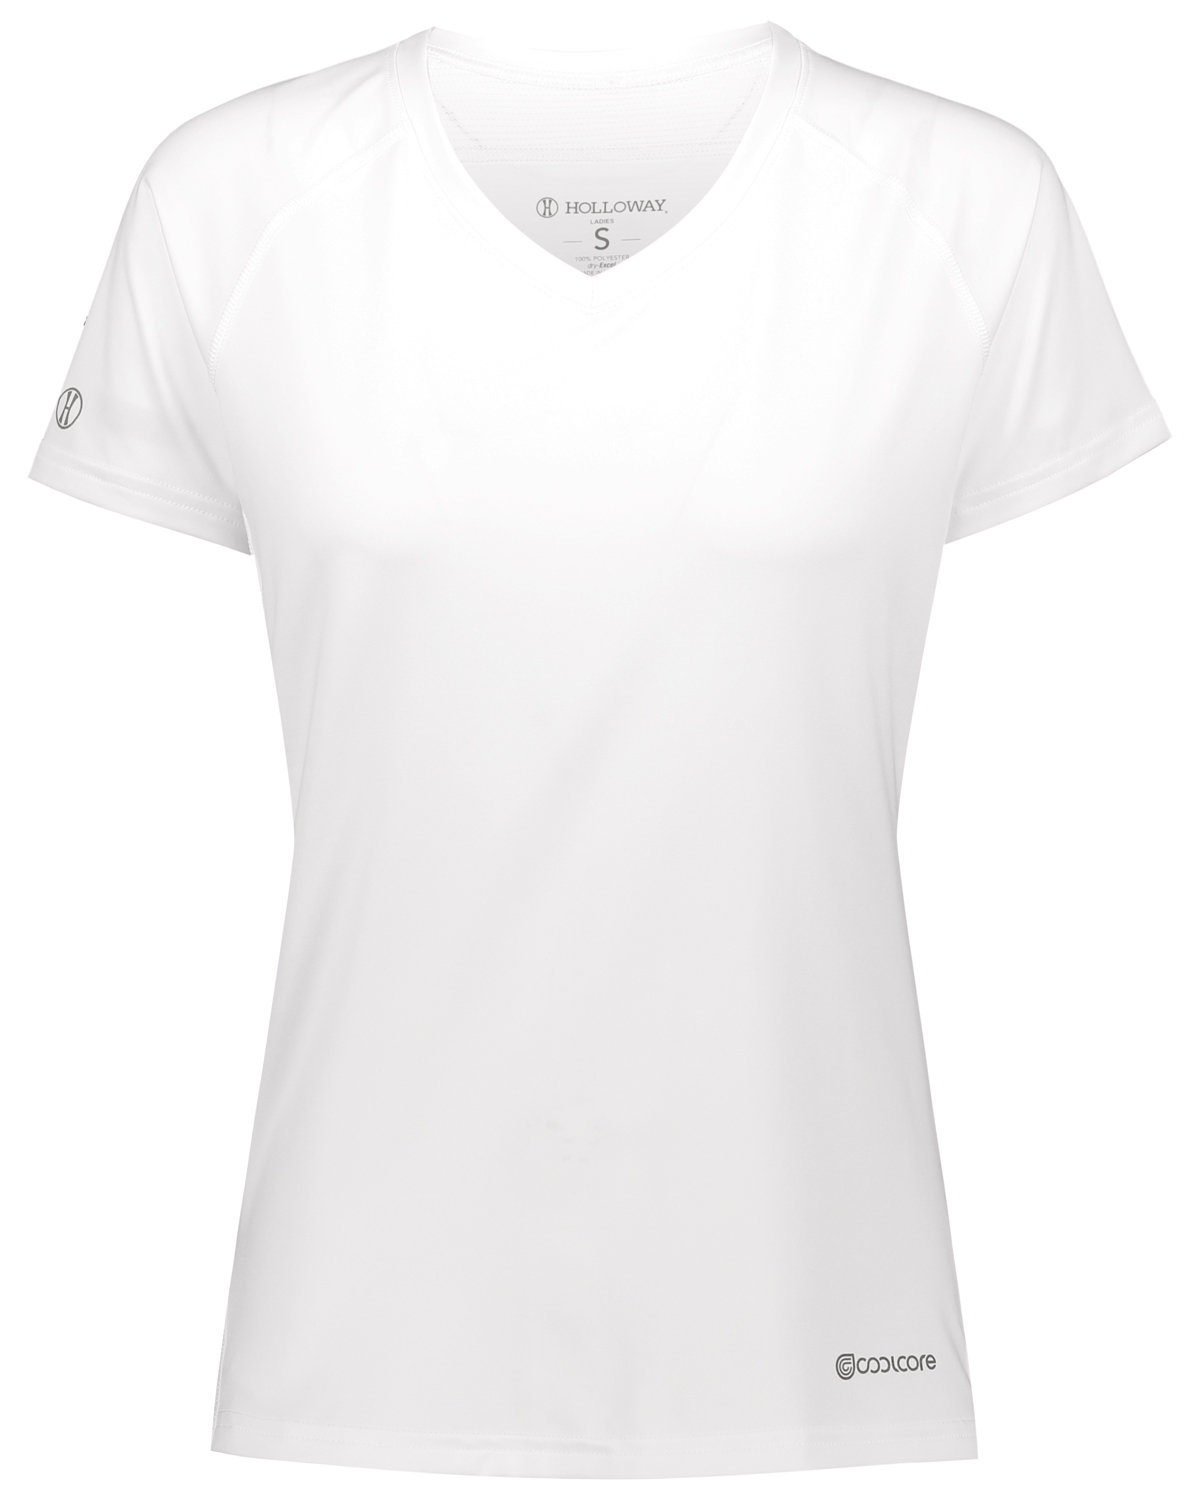 Ladies Electrify Coolcore T-Shirt-Holloway